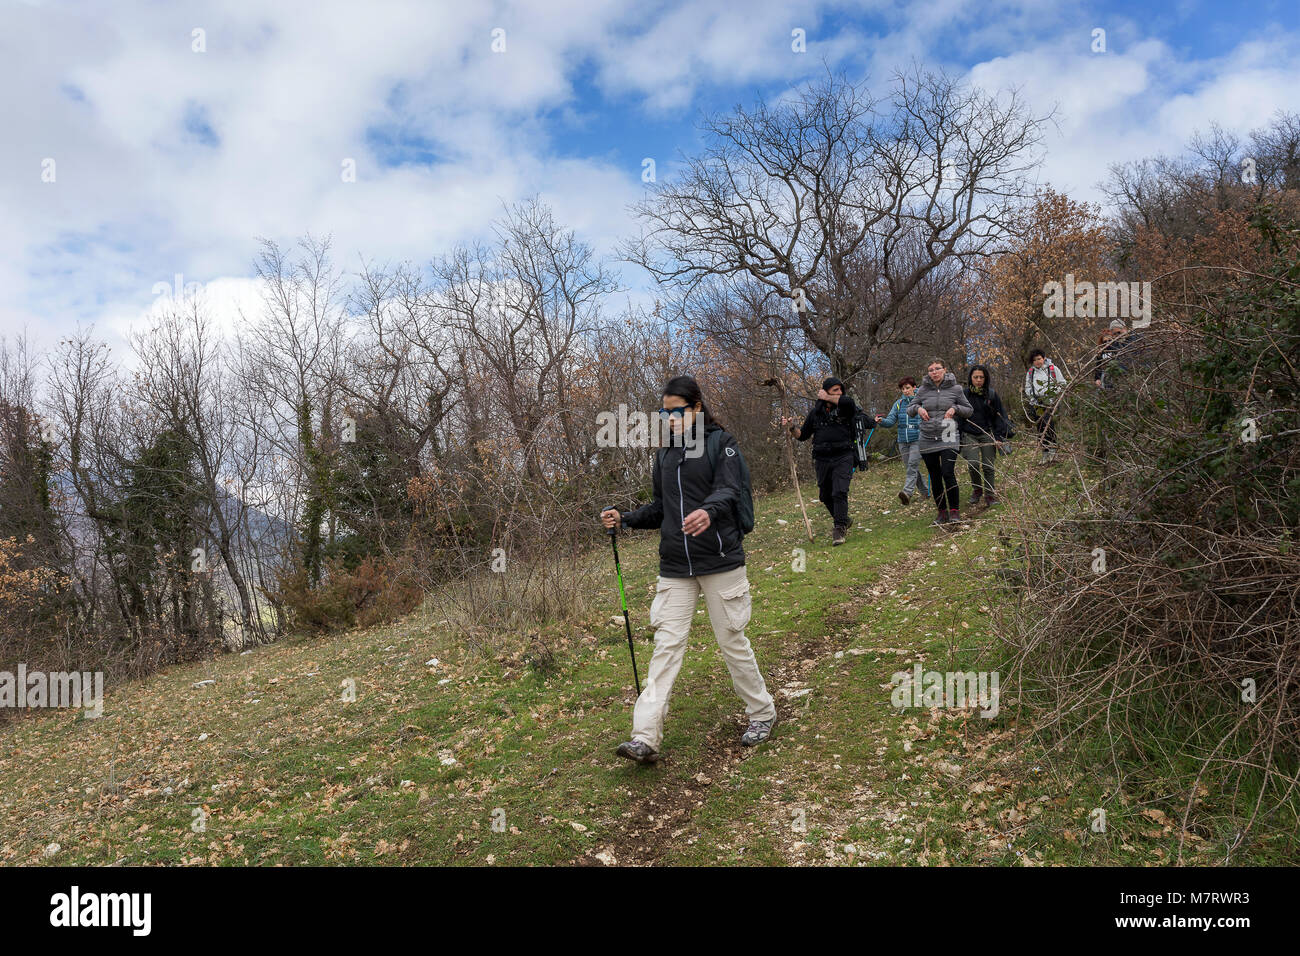 Monte San Giovanni in Sabina, Italy - March 10, 2018: A group of hikers explore mountain paths, among oak and holm oak woods. In the foreground, girl  Stock Photo